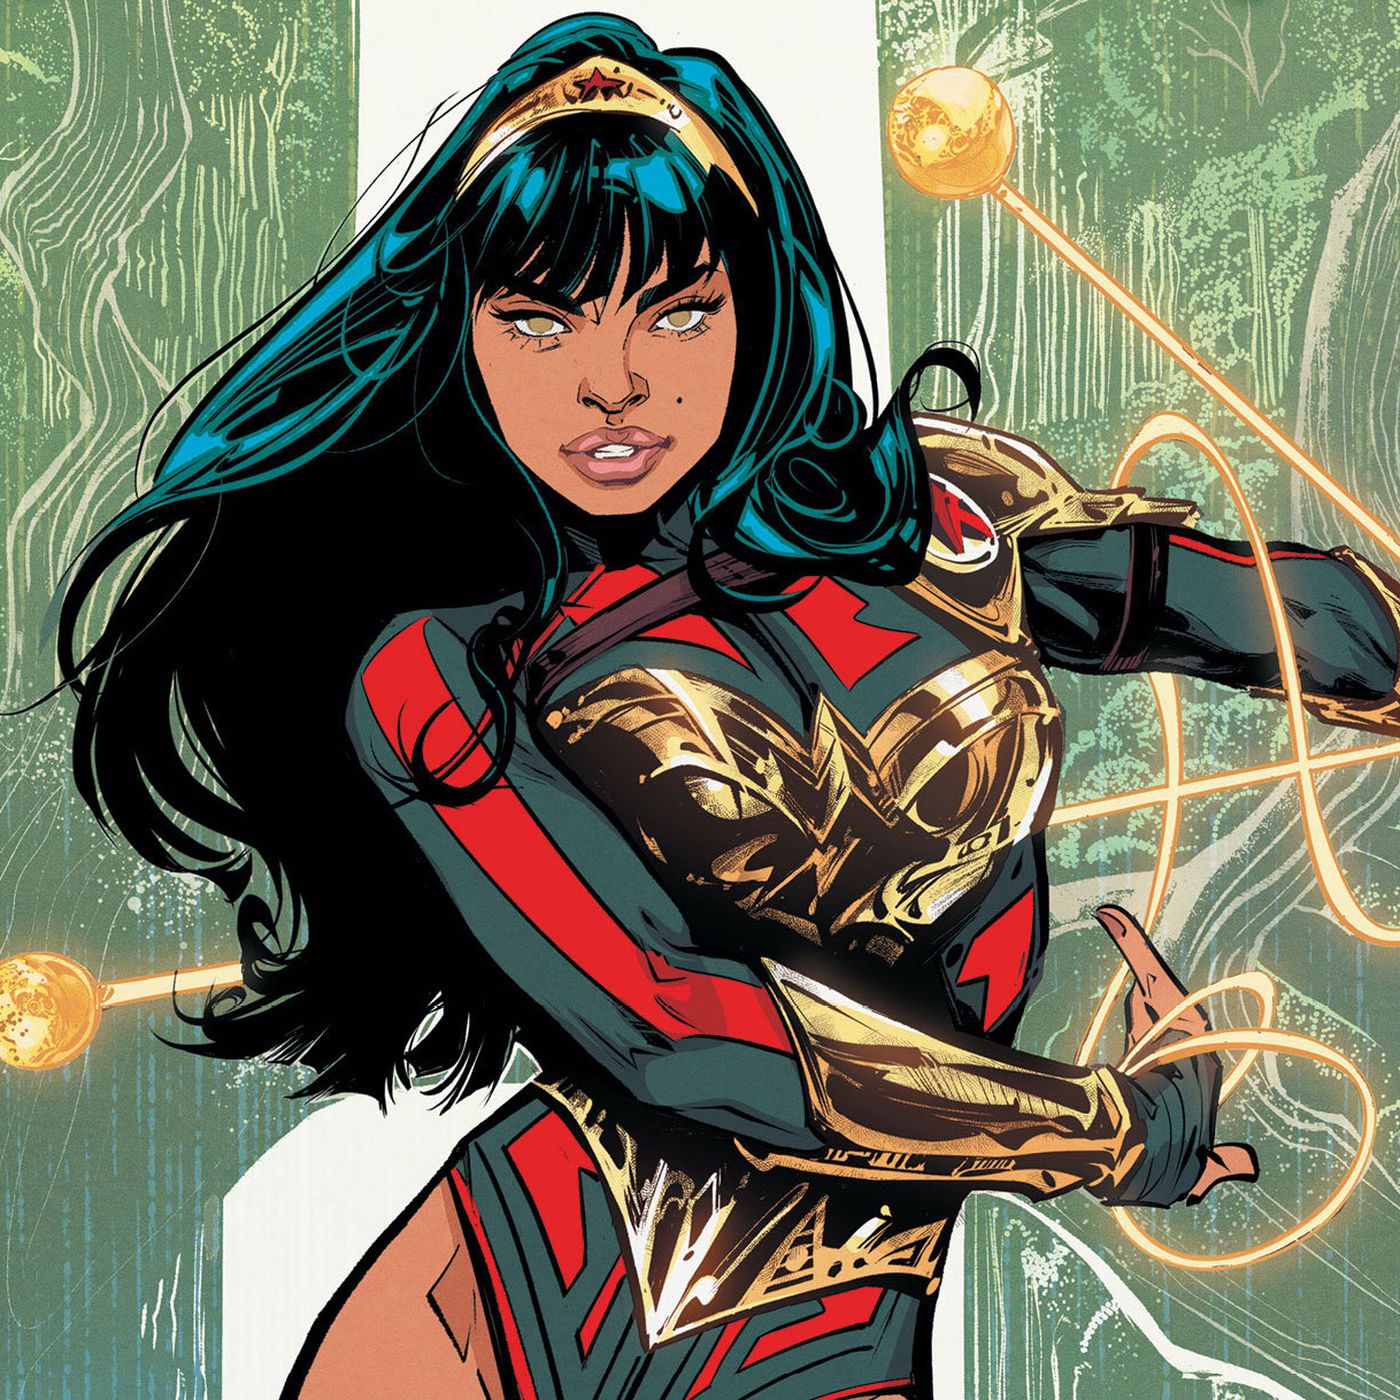 Young Wonder Woman TV series with Latina lead headed to CW - Polygon